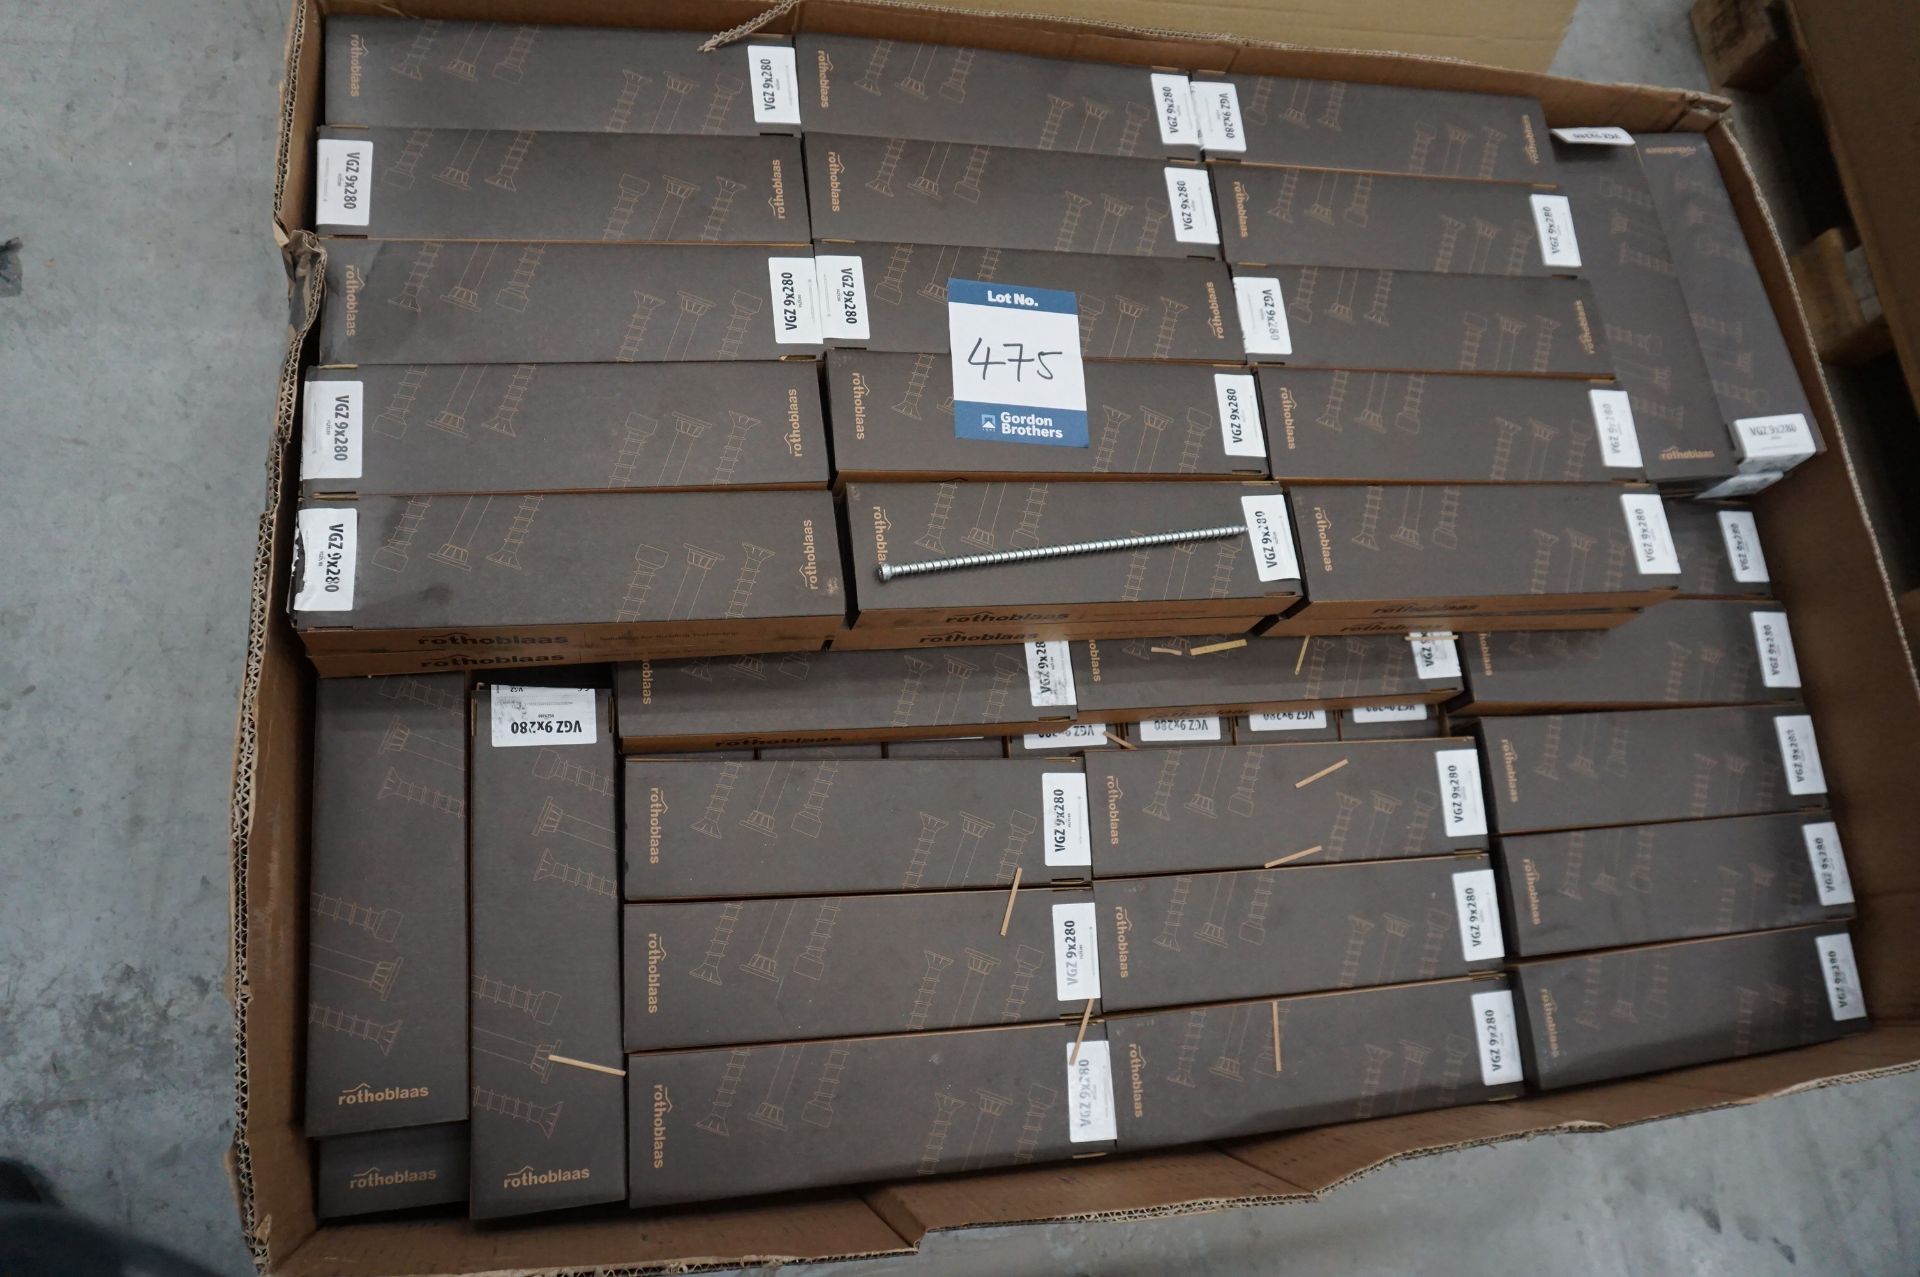 1x (no.) pallet box of Rothoblaas screws self tapping wood screws VGZ 9 x 280mm qty 3500 - Image 2 of 4